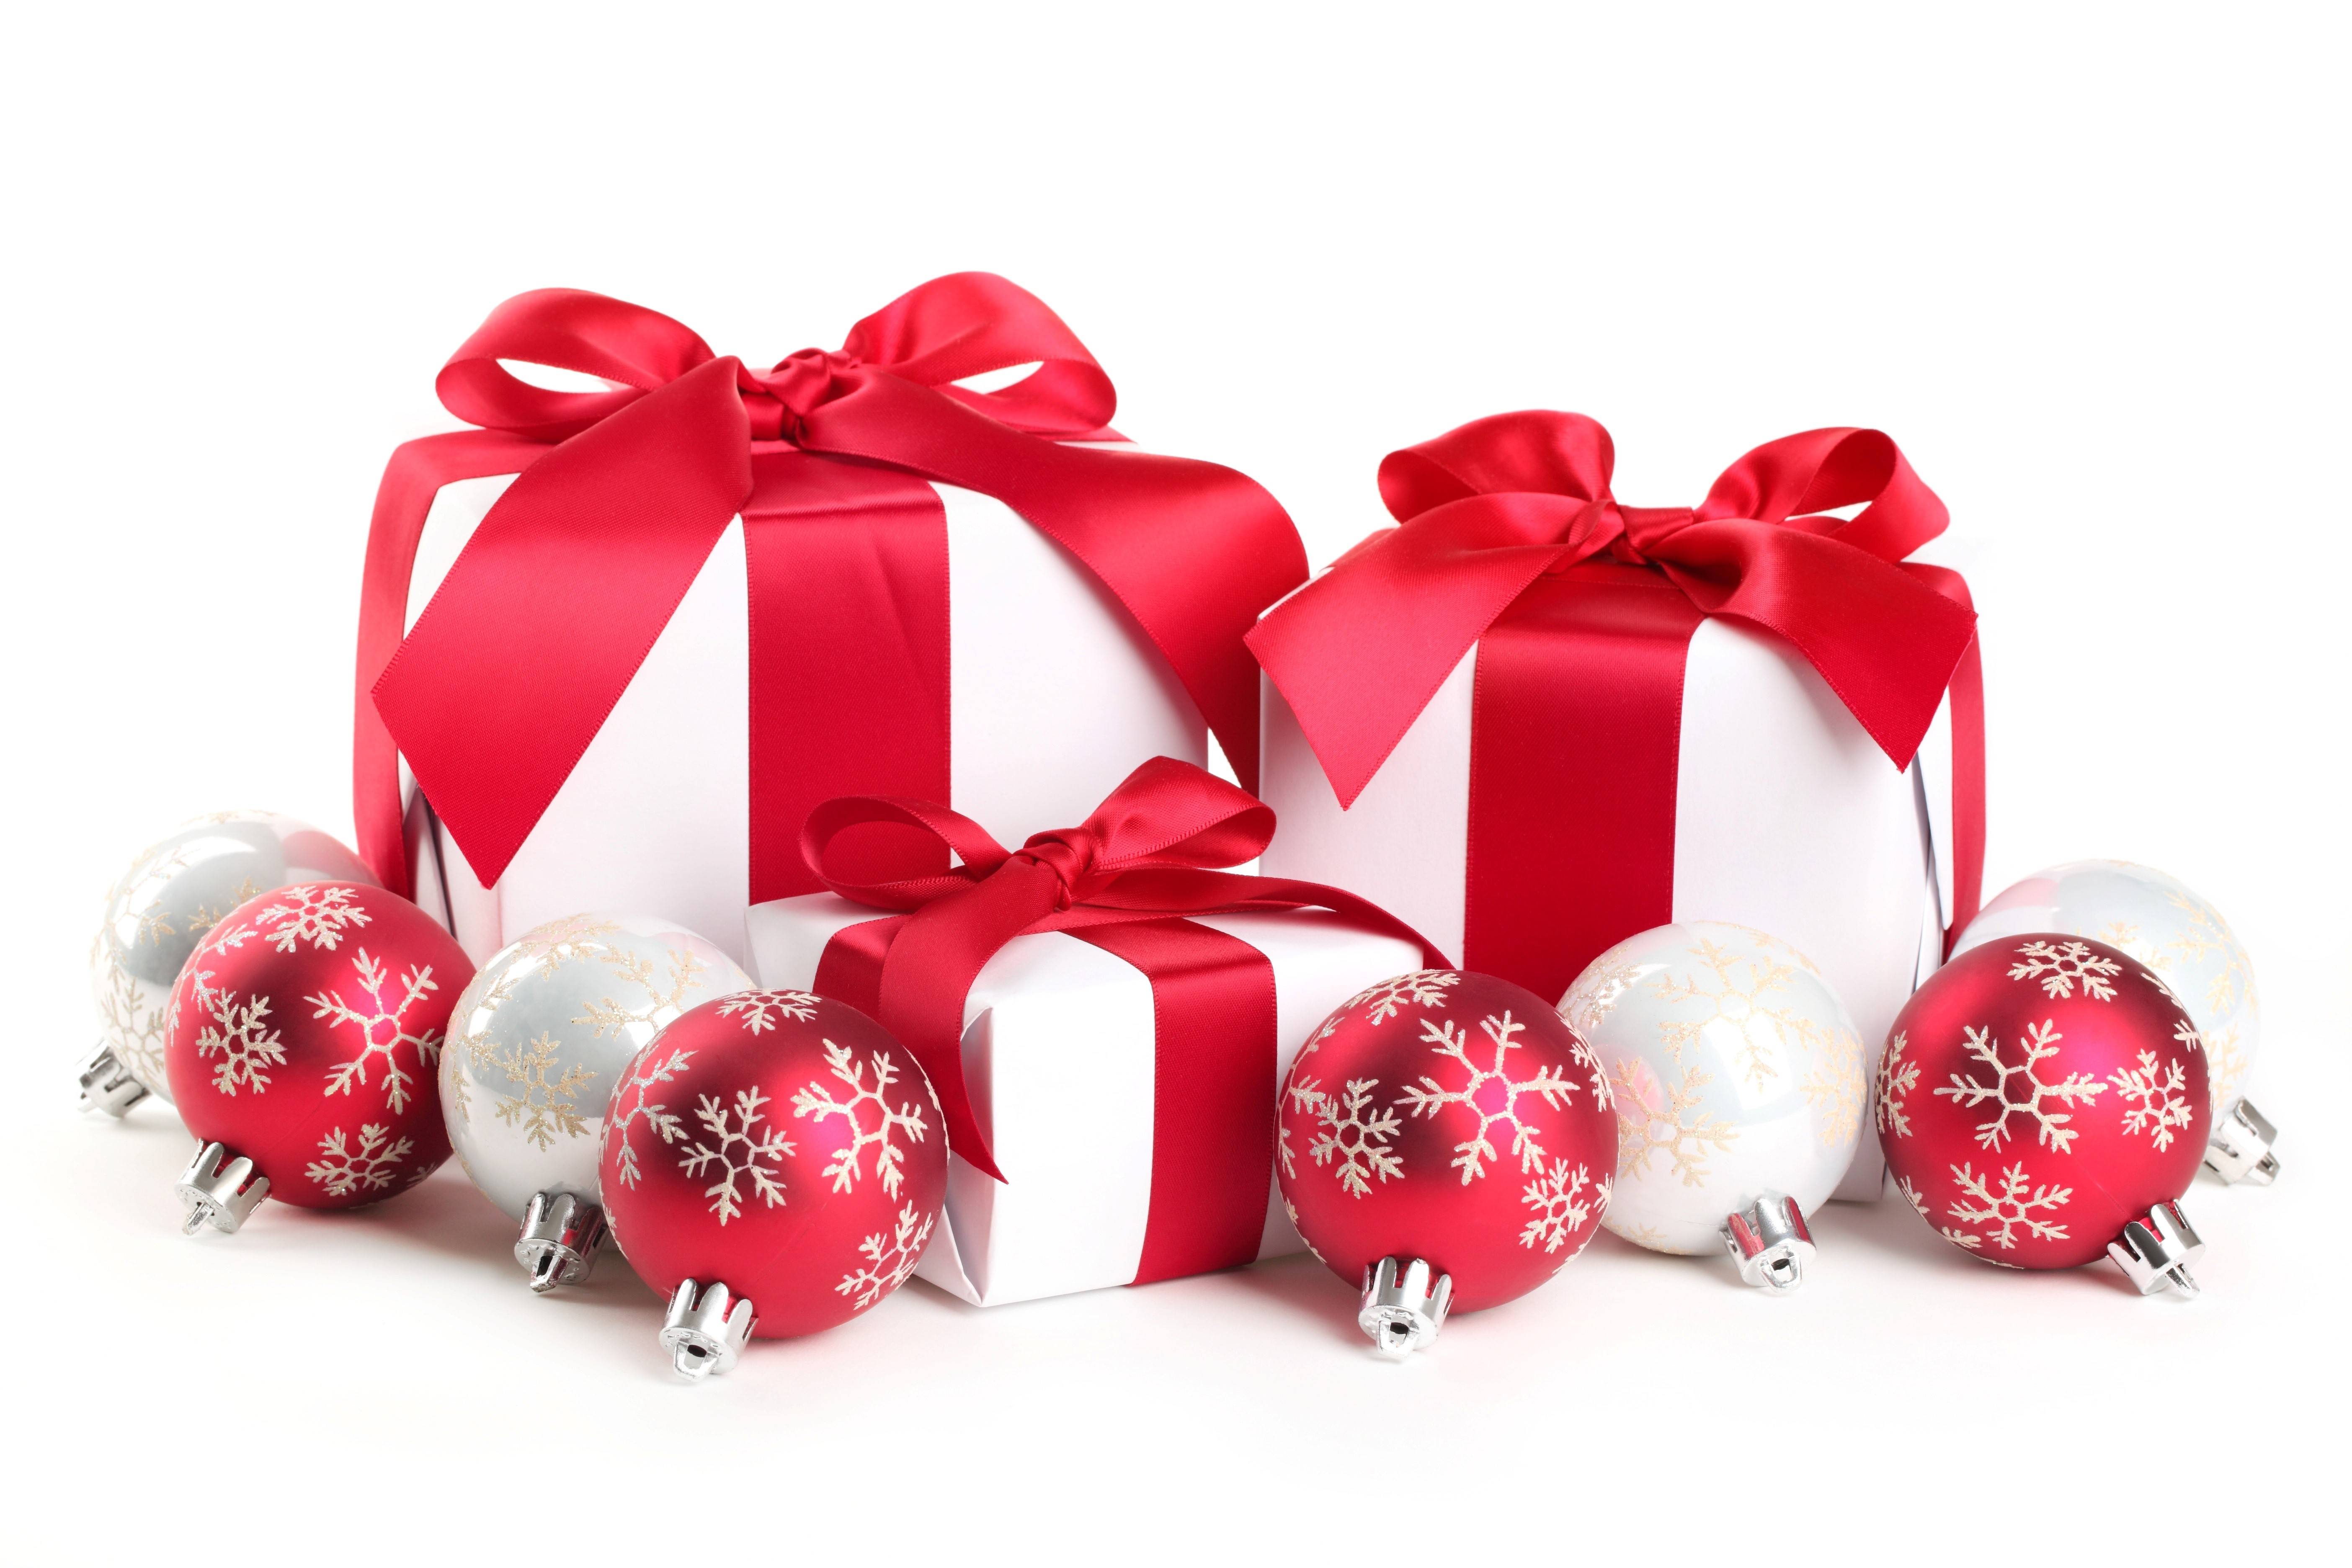 Red and White Christmas Balls and Gifts Wallpapers